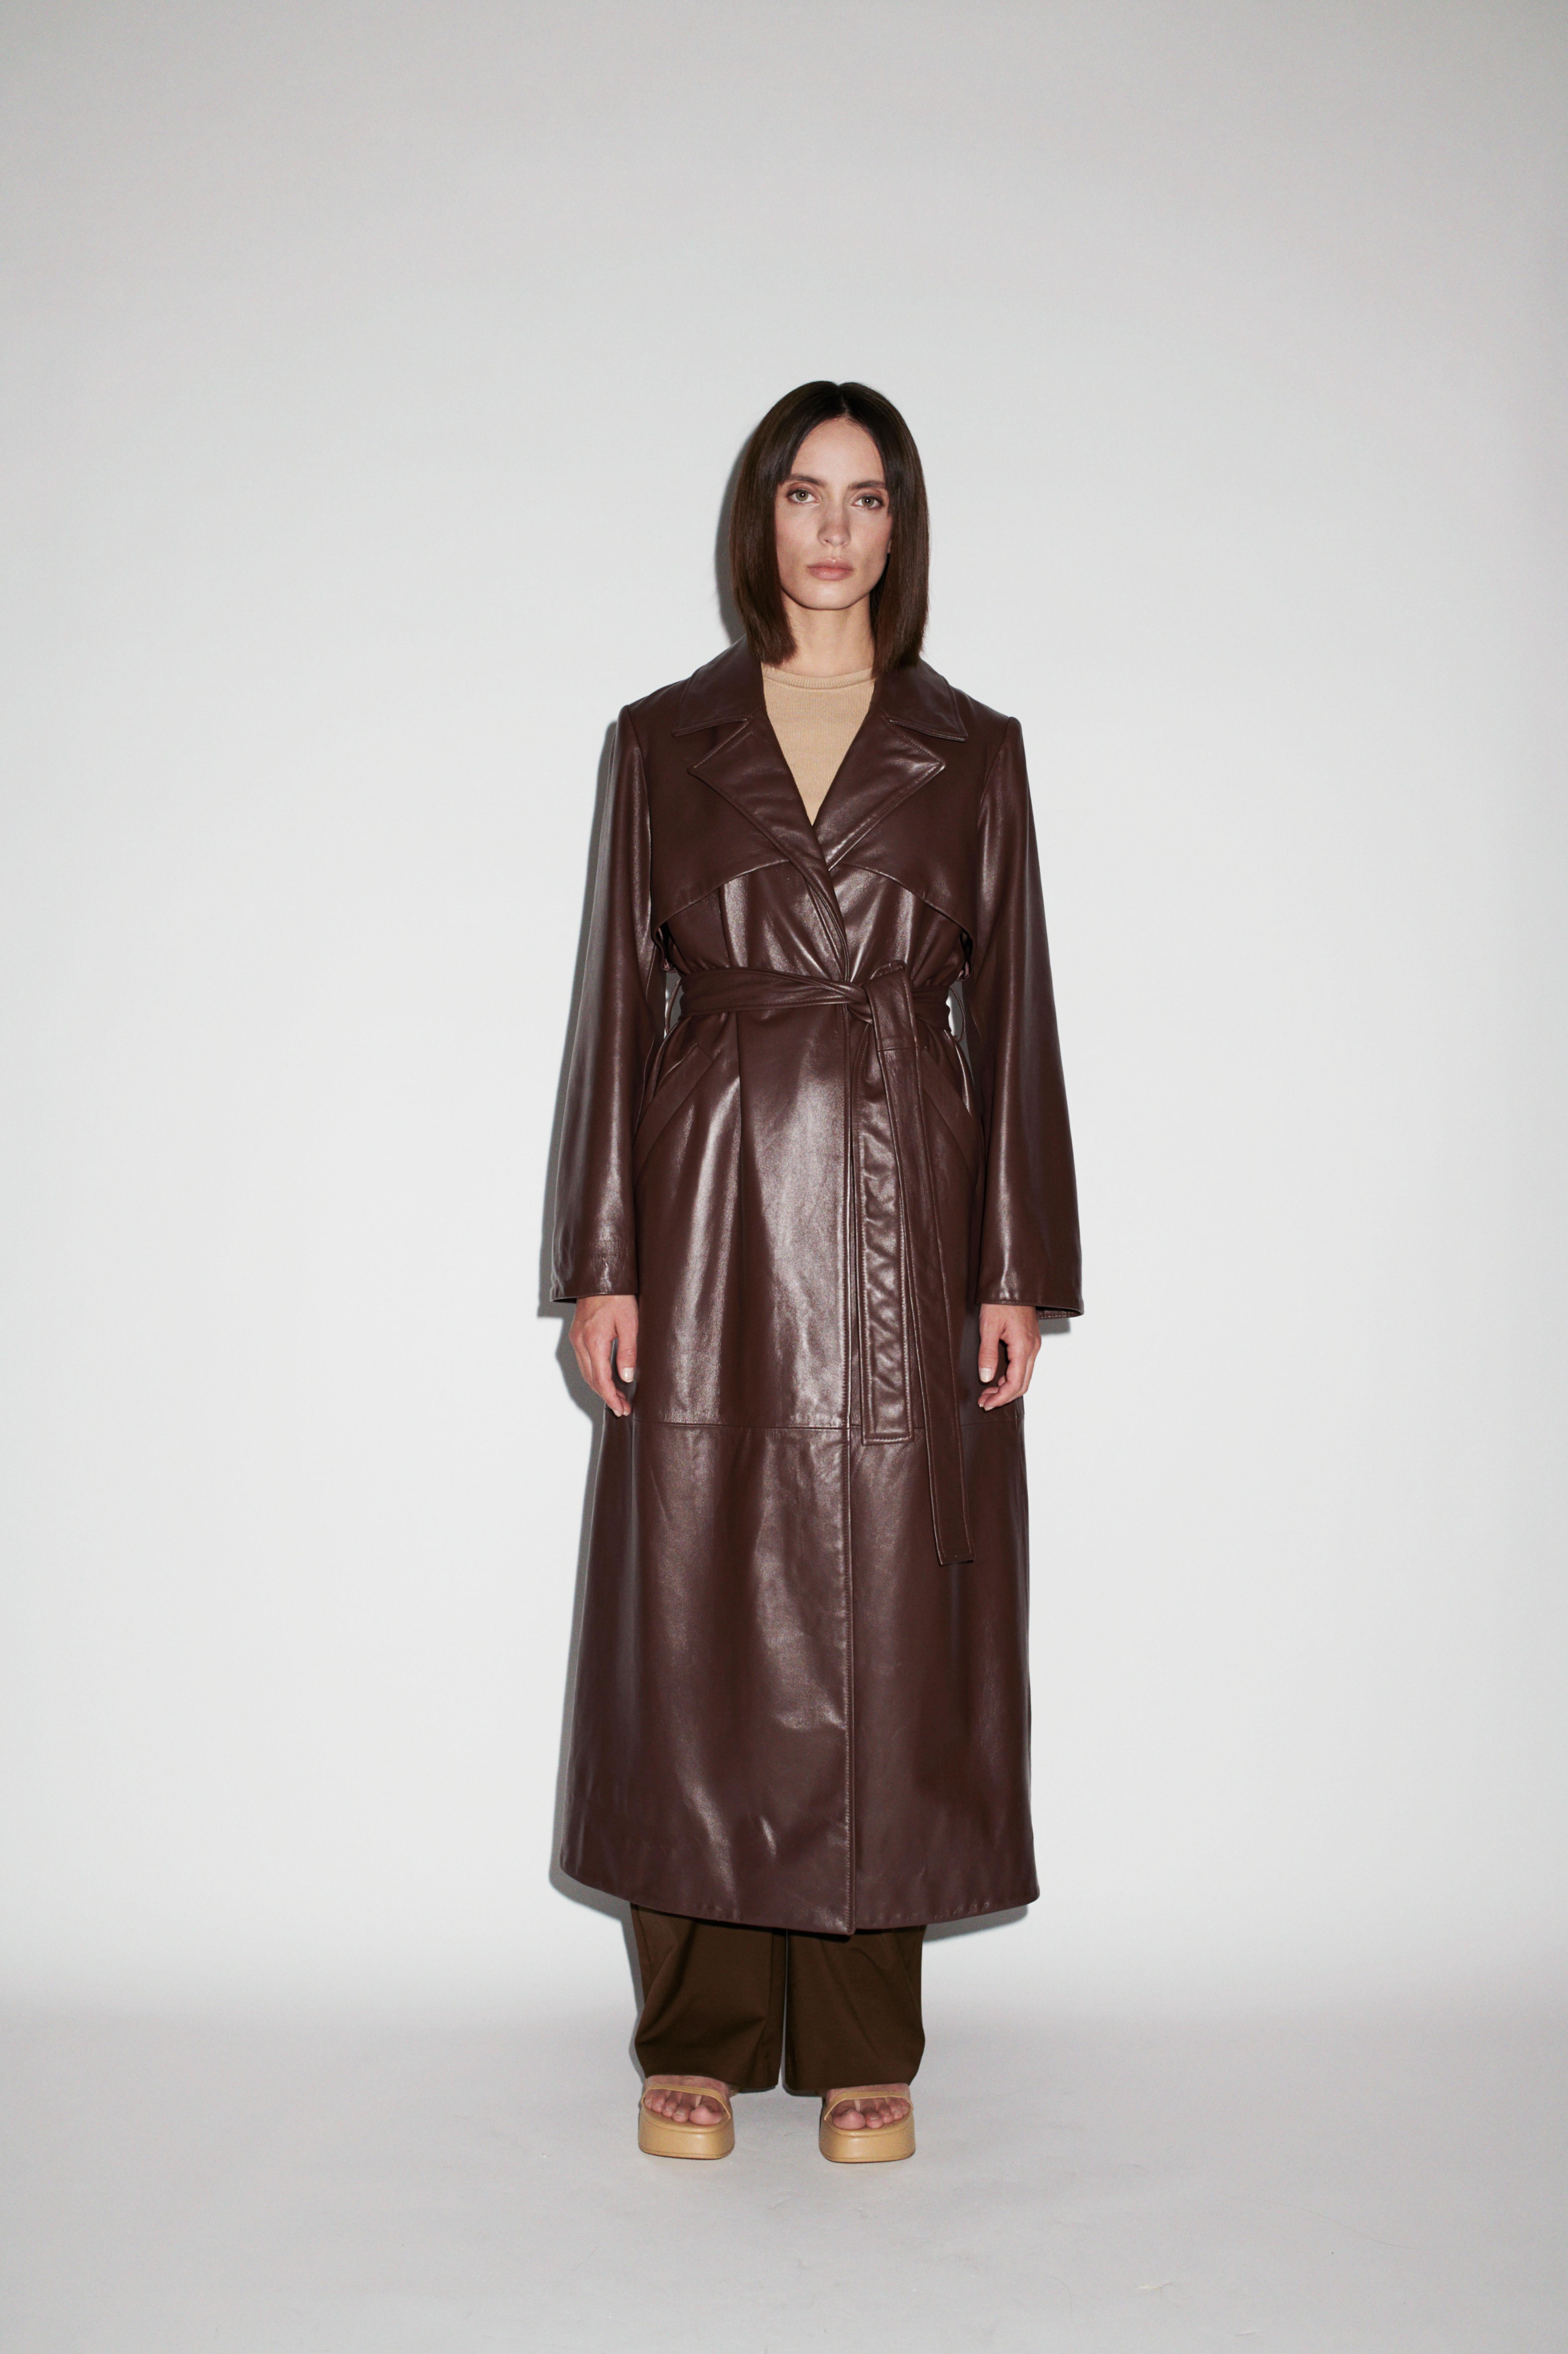 Verheyen London Leather Trench Coat in Black - Size uk 10

Handmade in London, made with 100% Italian Lambs Leather this luxury item is an investment piece to wear for a lifetime.  This piece is made by artisans in London, expert artisans who make